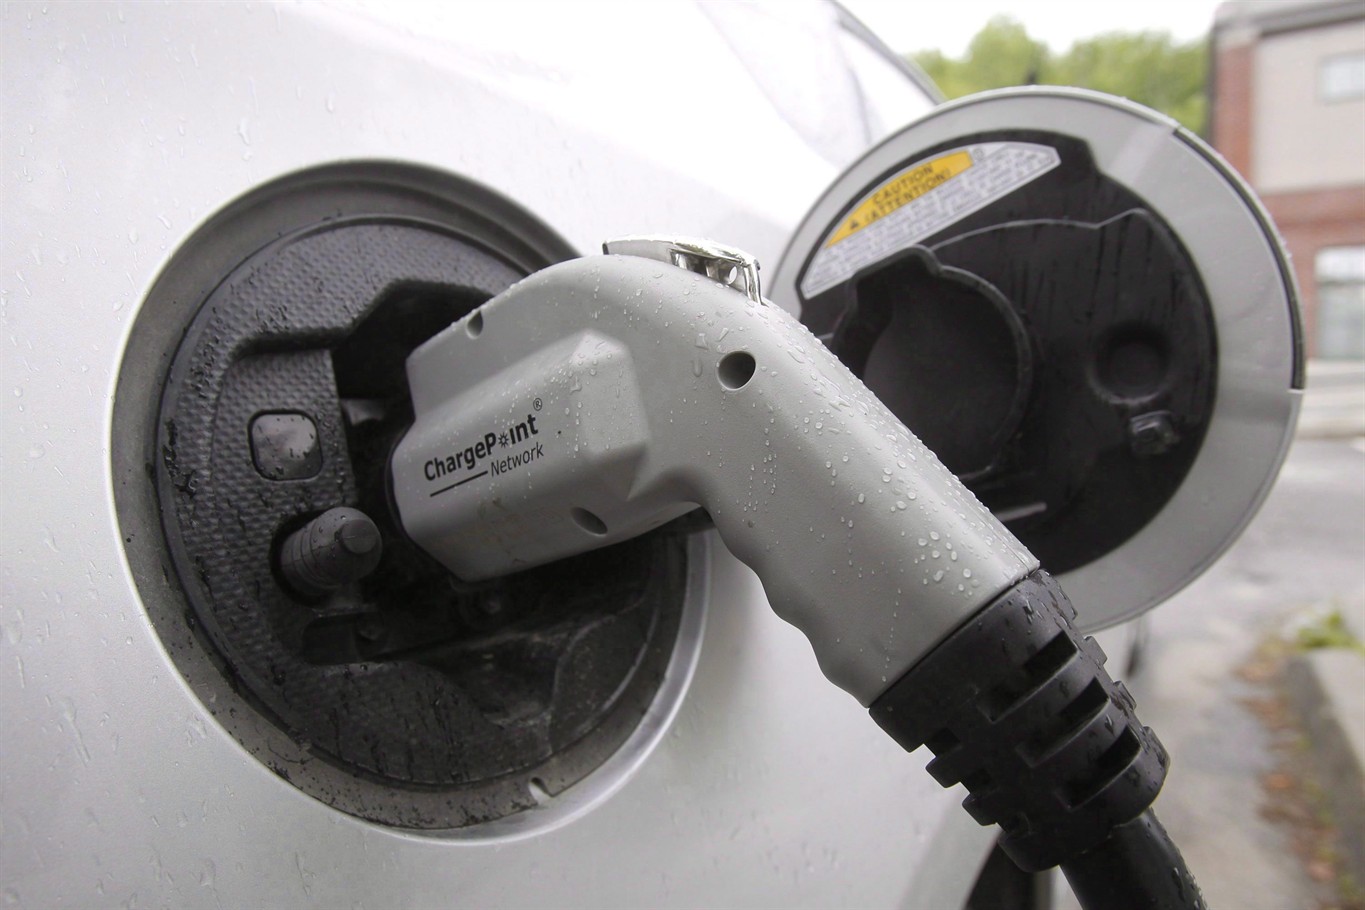 Nova Scotia Power to build electric vehicle fastcharging network in